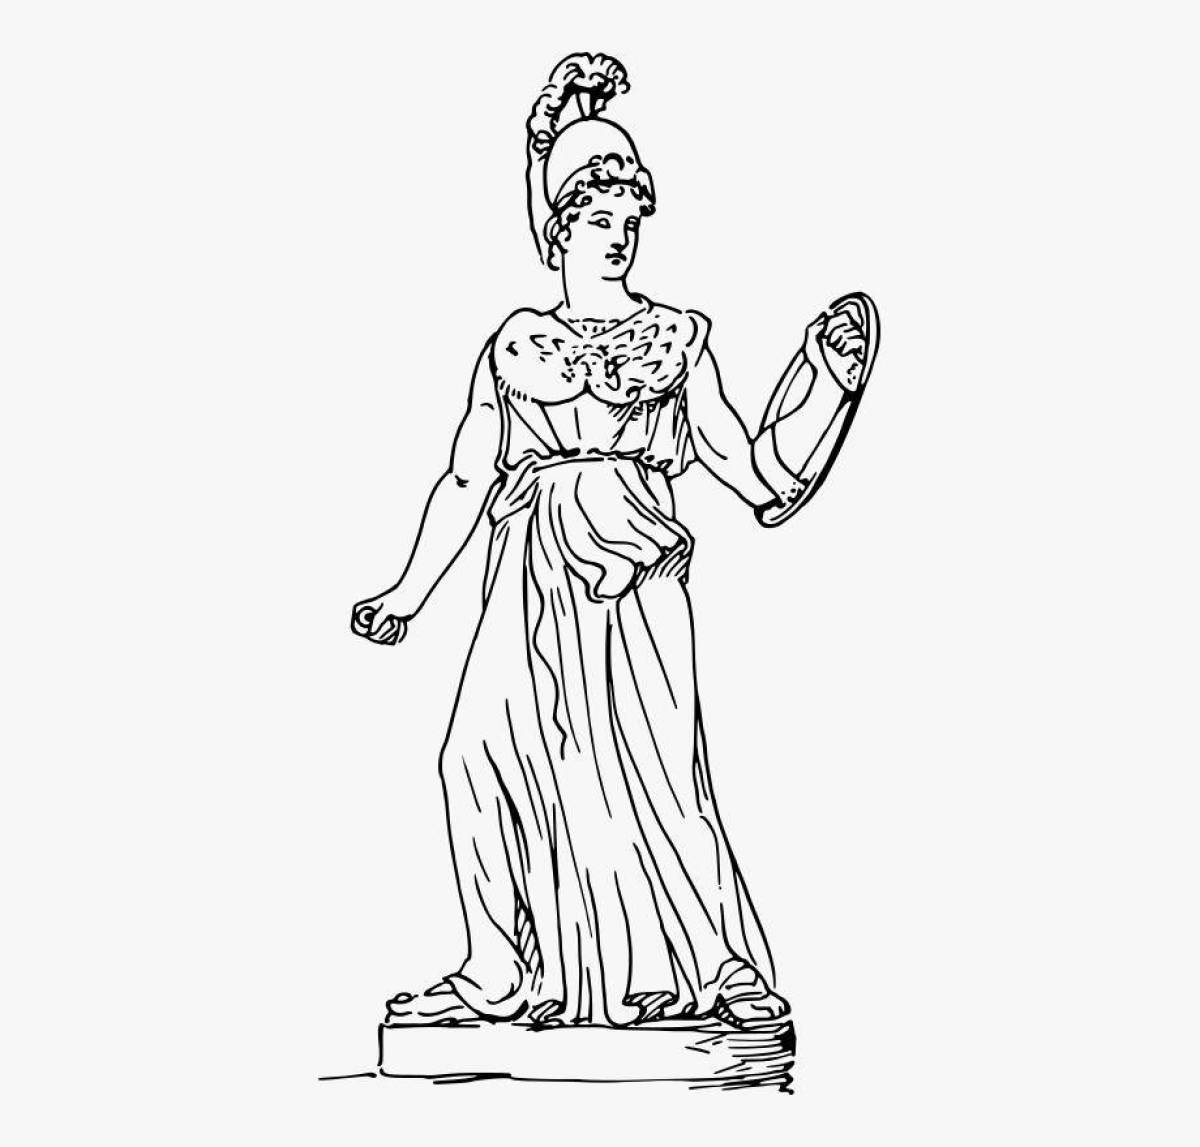 Immaculate goddess athena coloring page